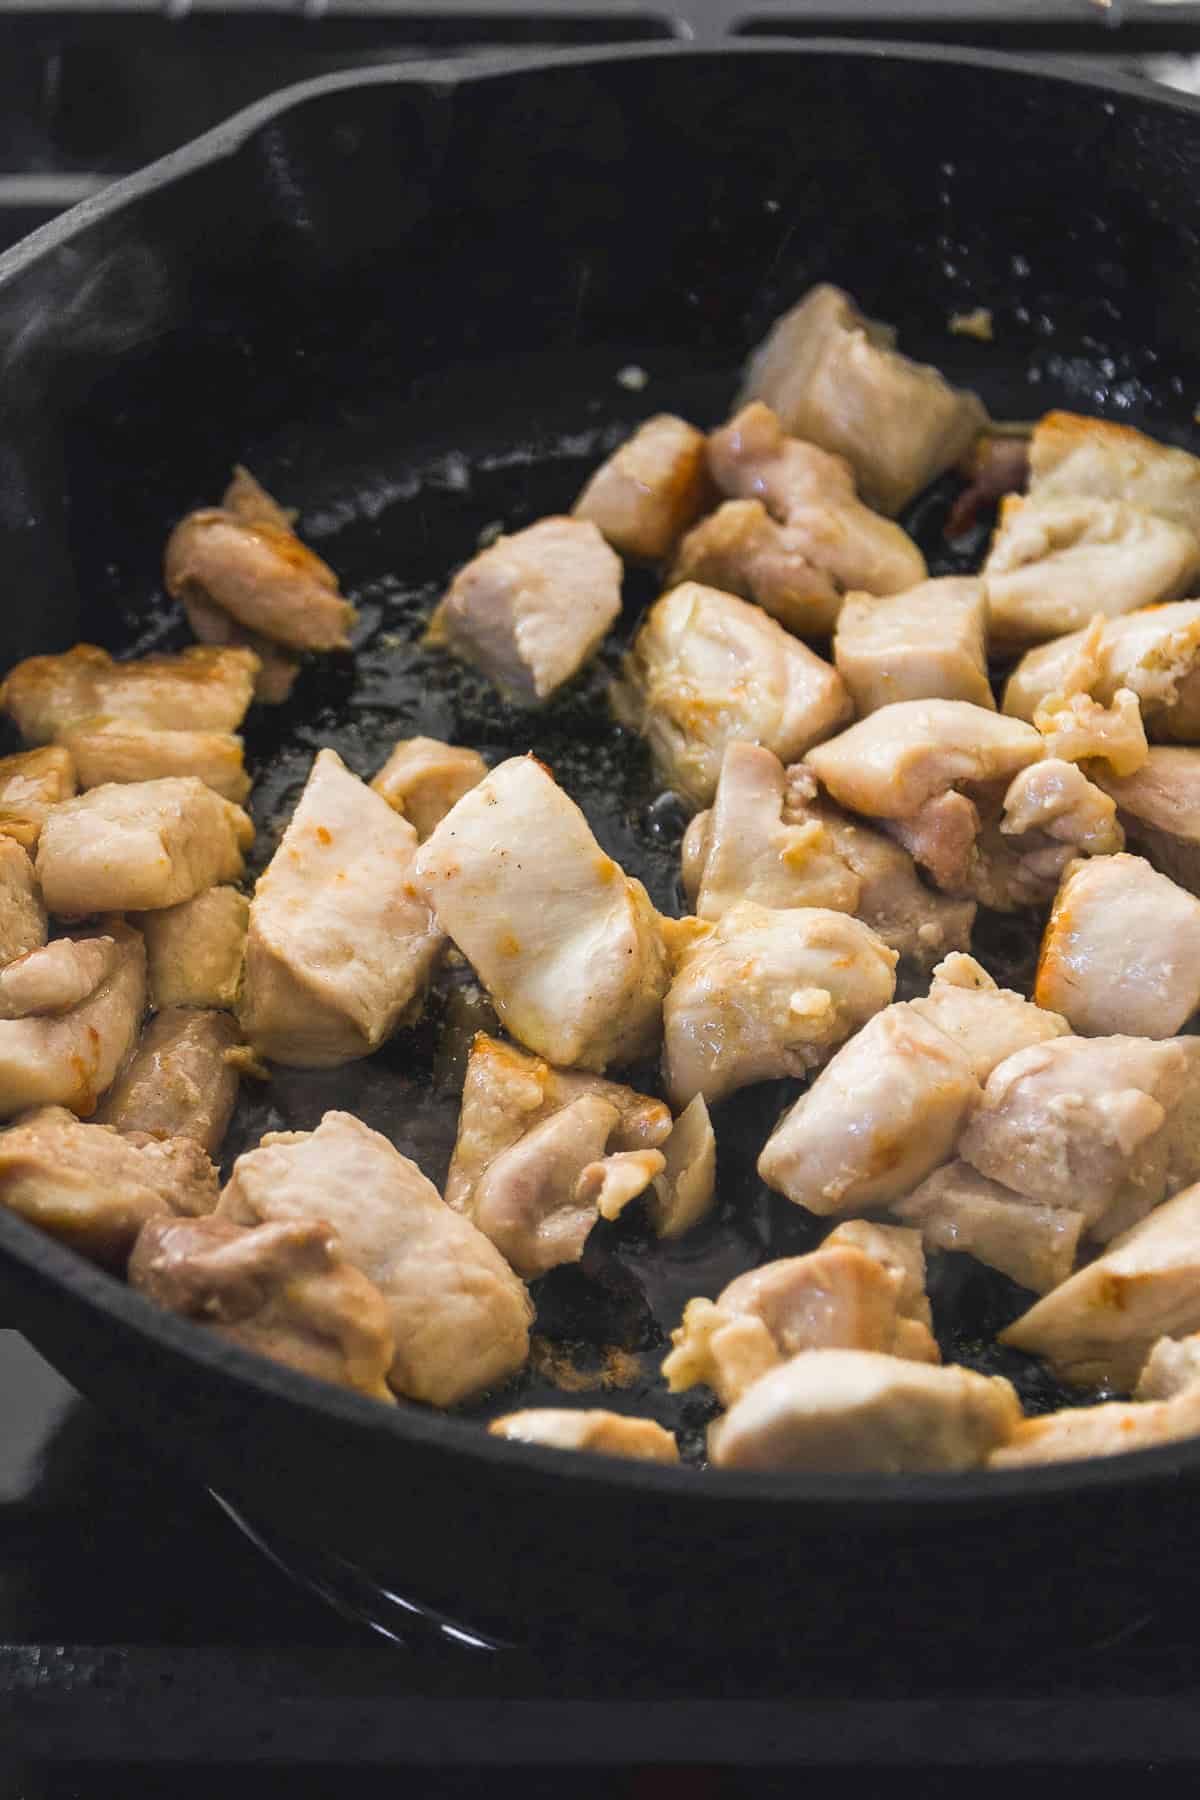 Chicken bites cooking in a cast iron skillet.